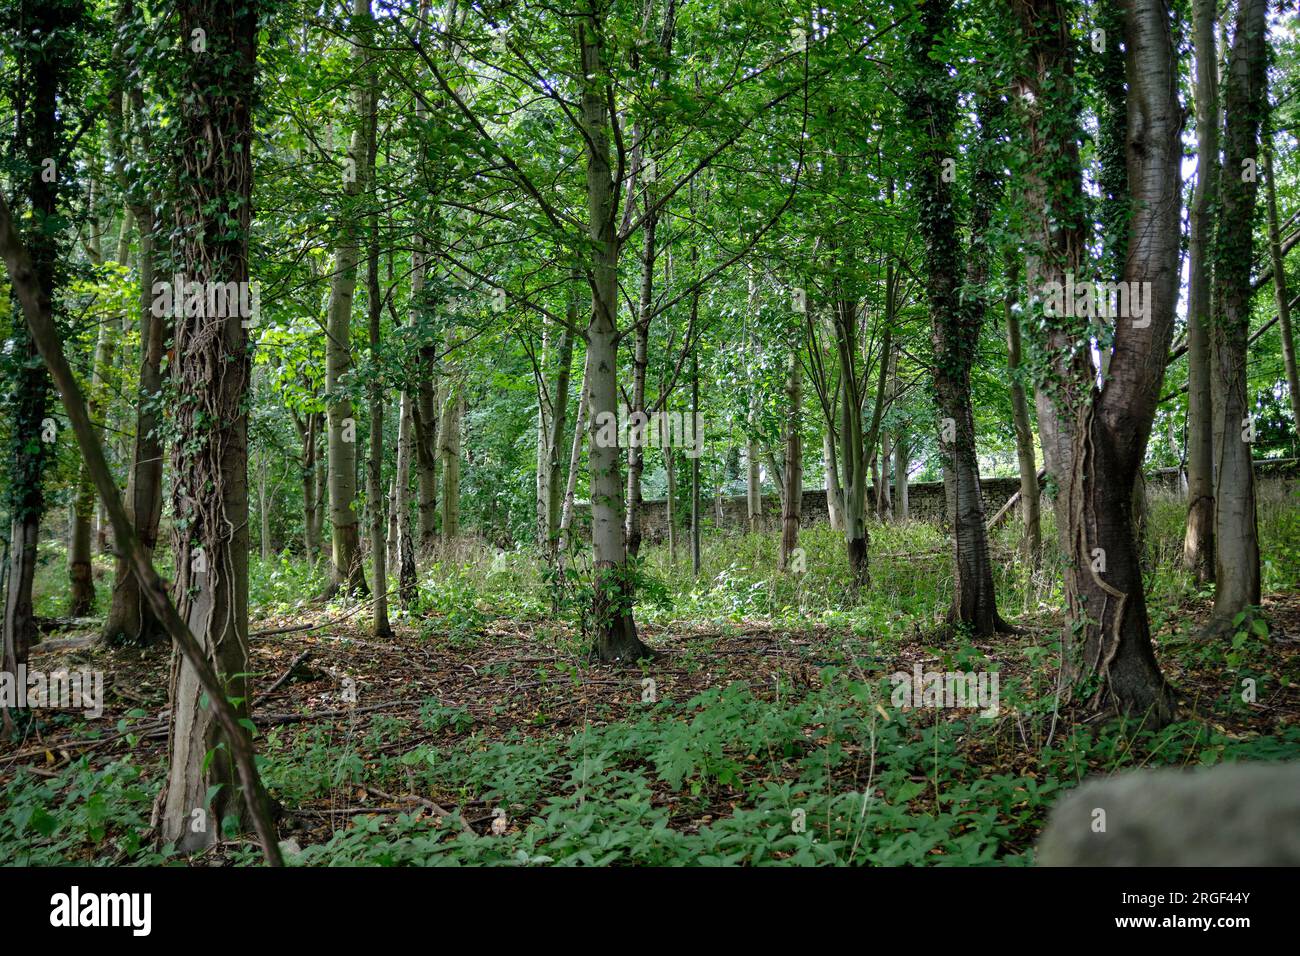 Trees in Woodland copse, Rural community of Womersley, North Yorkshire, North England, UK Foto Stock